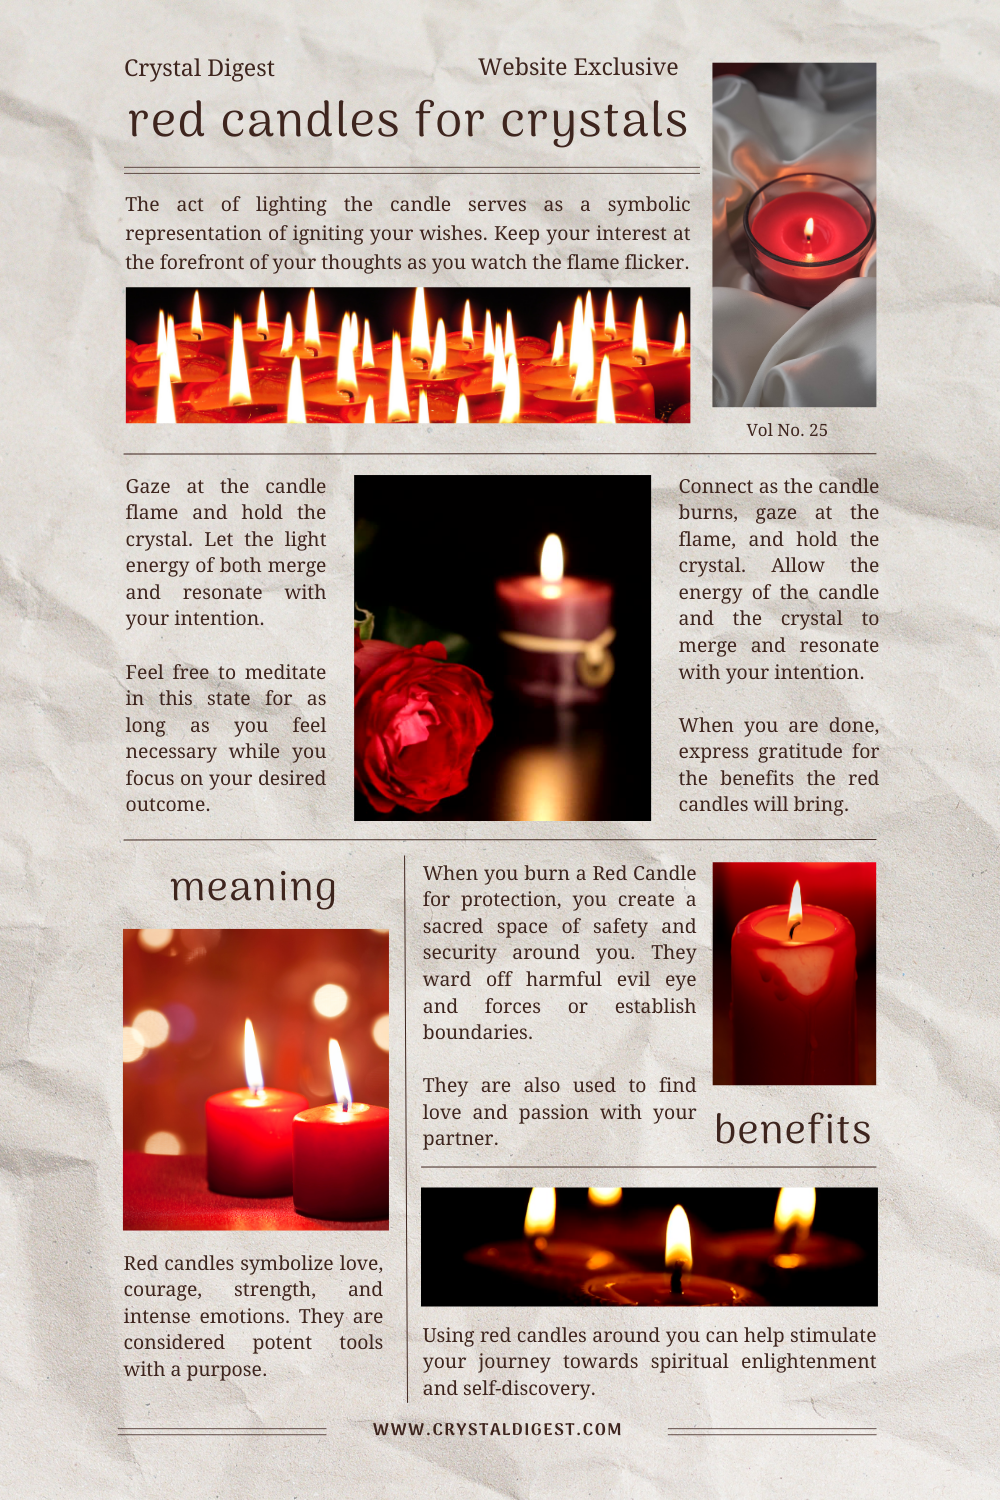 Red Candles for Crystals by Crystal Digest